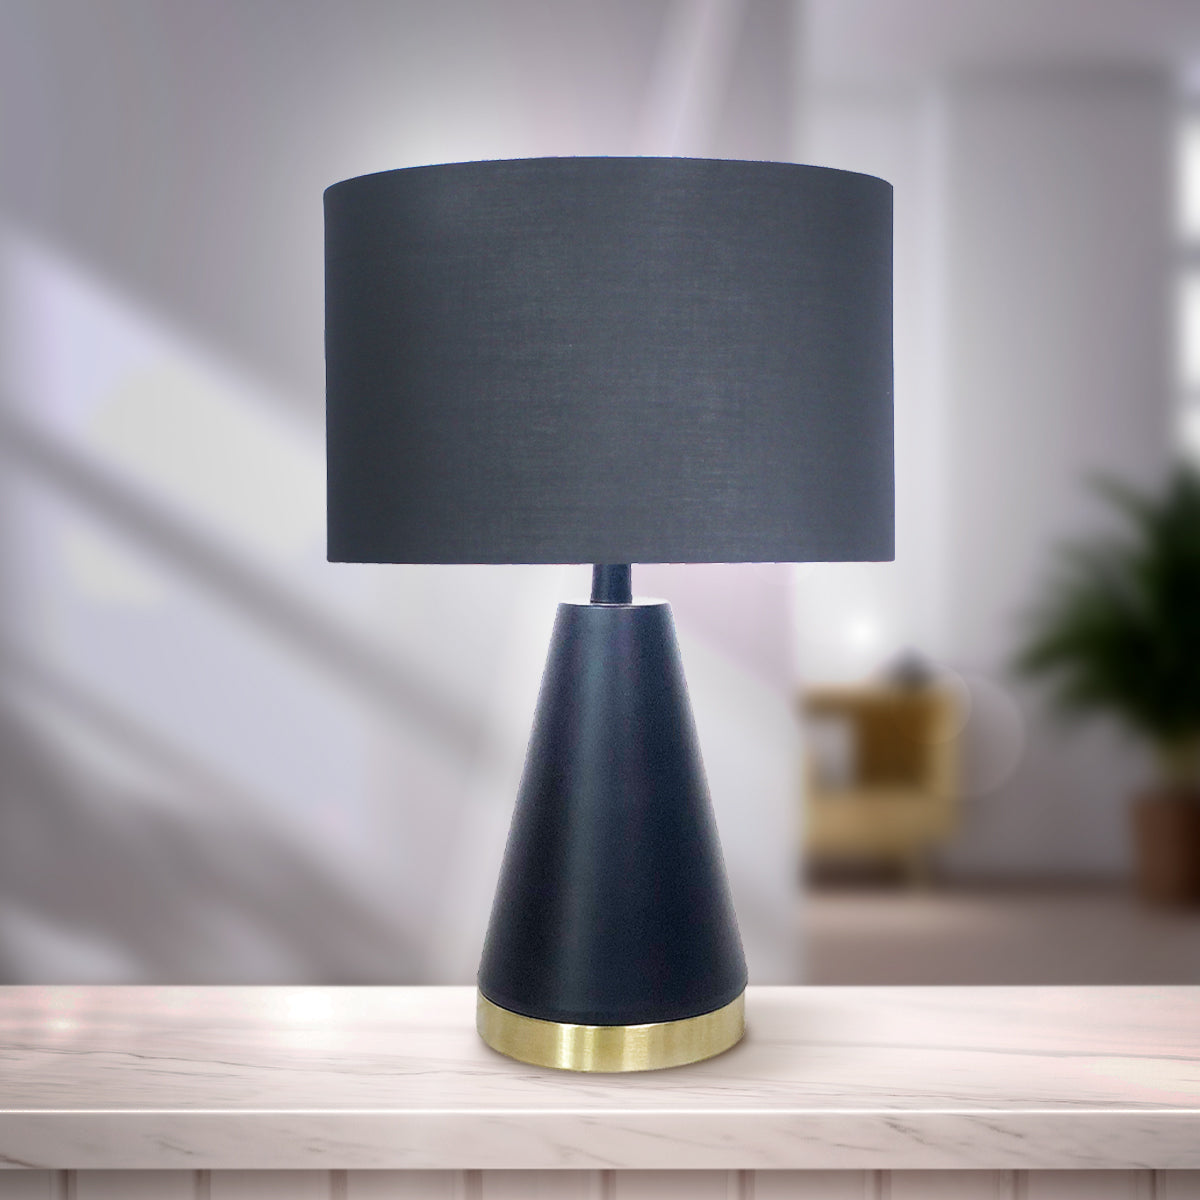 Sarantino Metal Table Lamp in Black and Gold-Home &amp; Garden &gt; Lighting-PEROZ Accessories